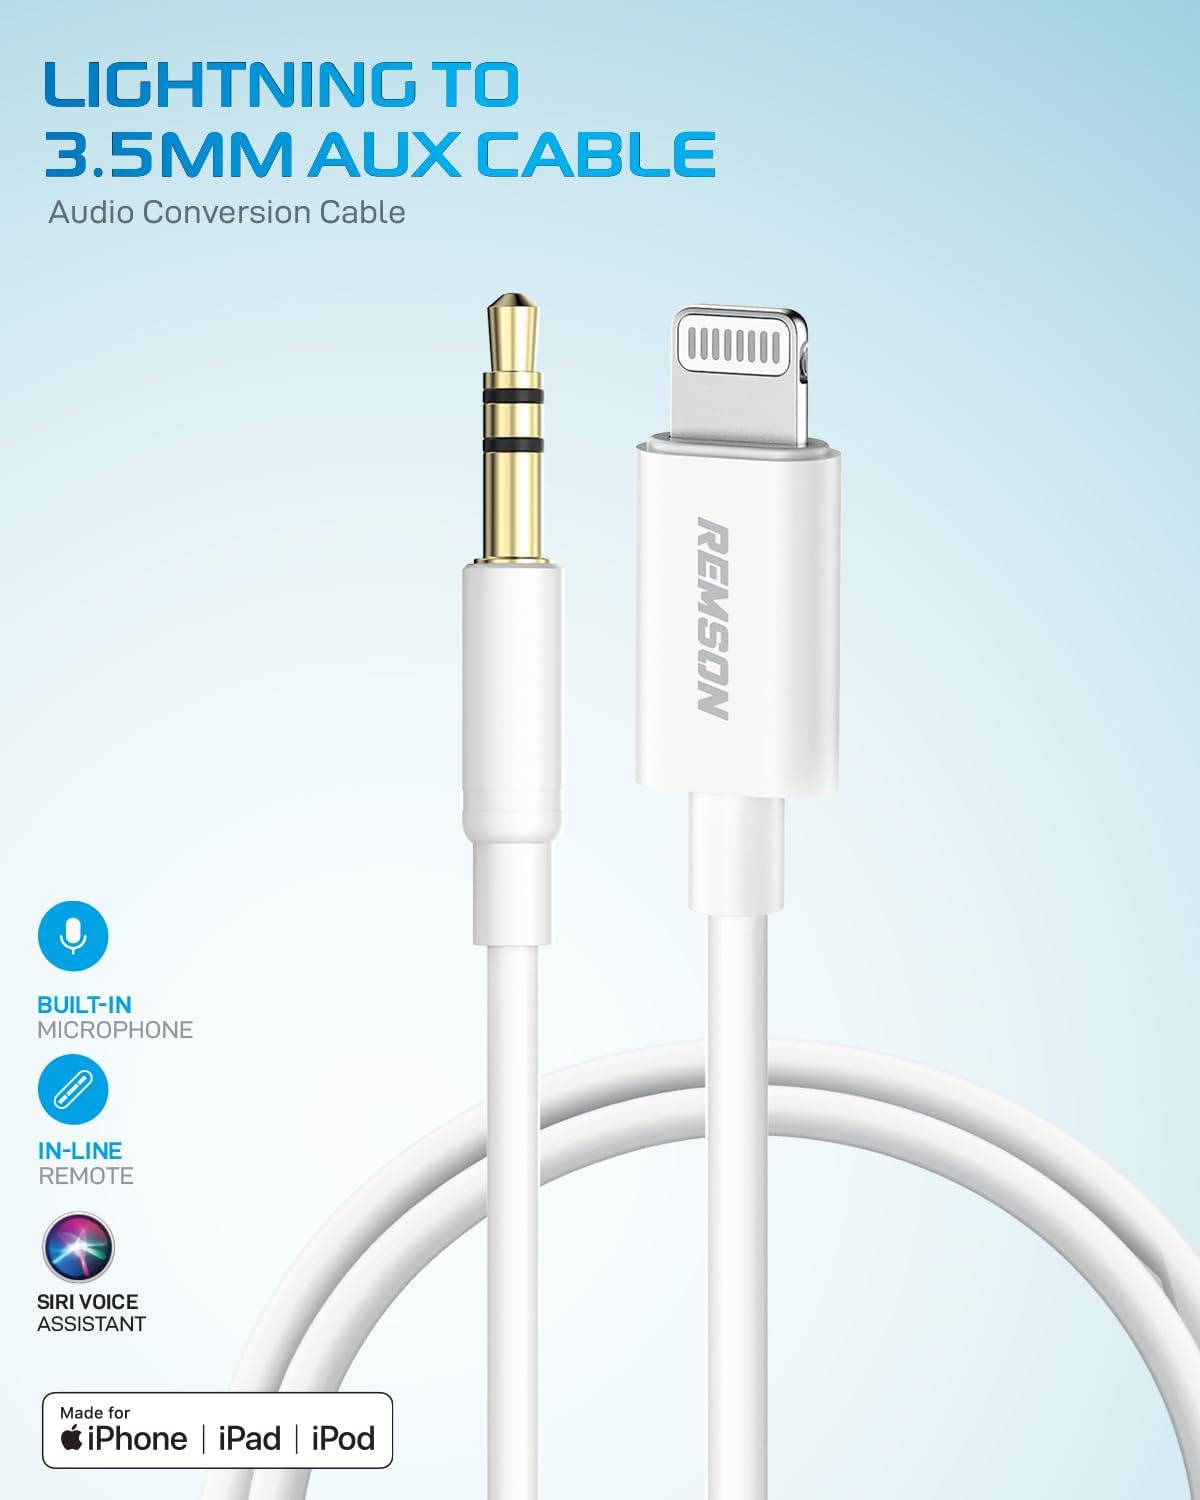 [Apple MFi Certified] Remson Lightning to 3.5 mm AUX Cable 1.2M Audio Conversion Cable Car Stereo Speaker Headphone Jack Adapter Audio Cable - White